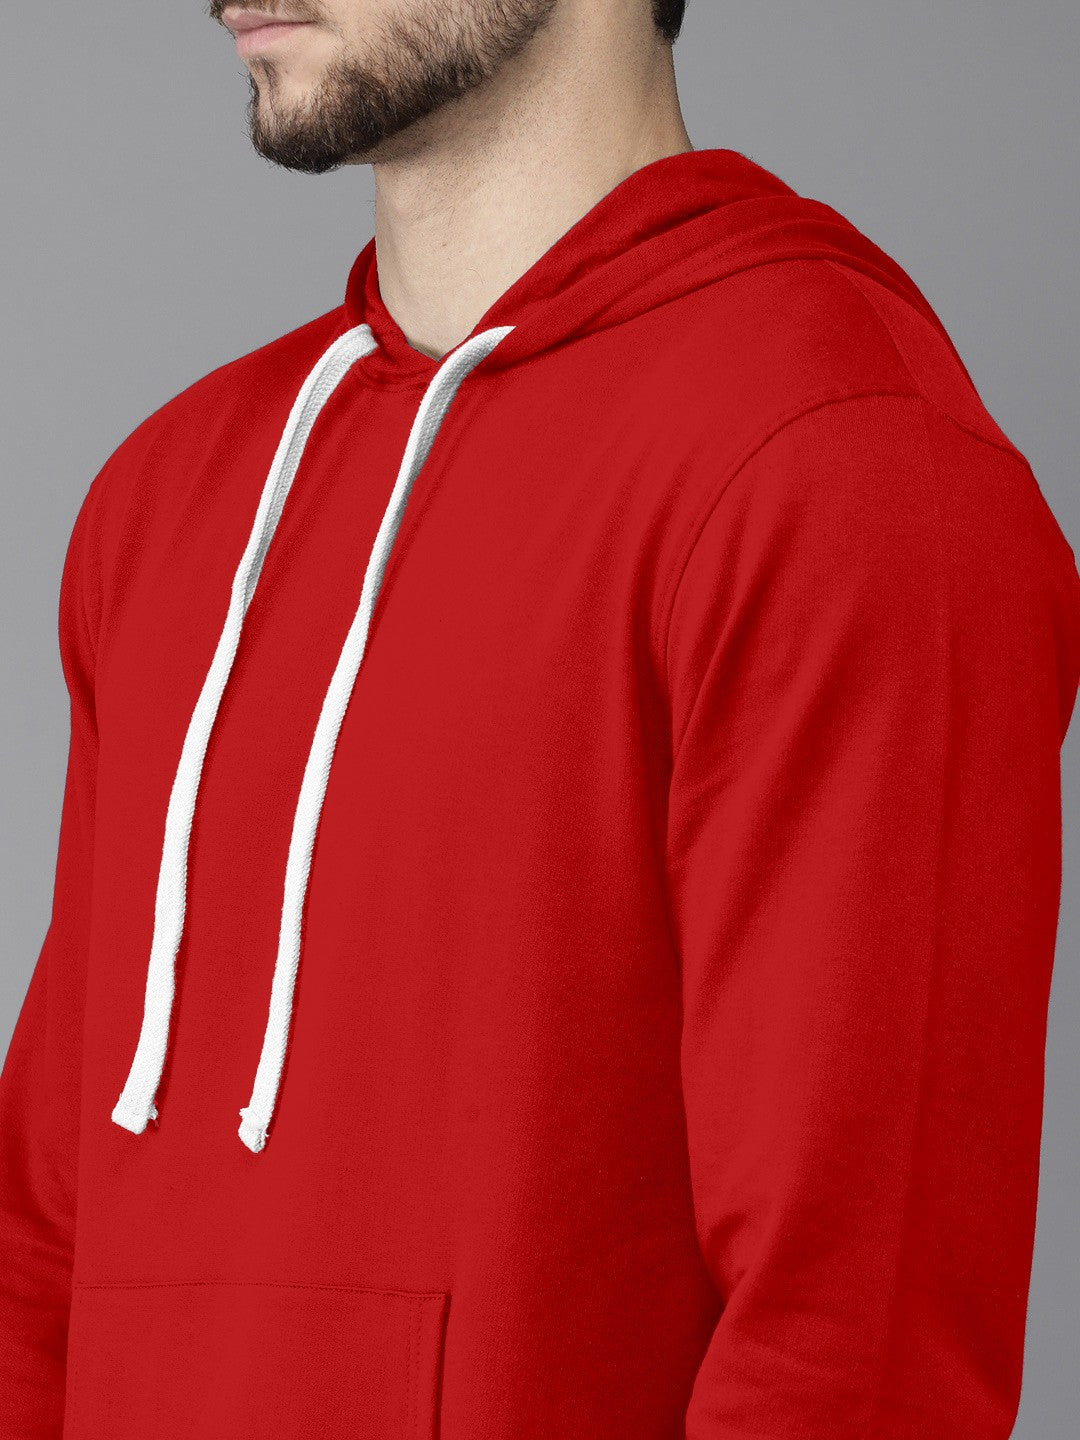 Red Colour High Quality Premium Hoodie For Men